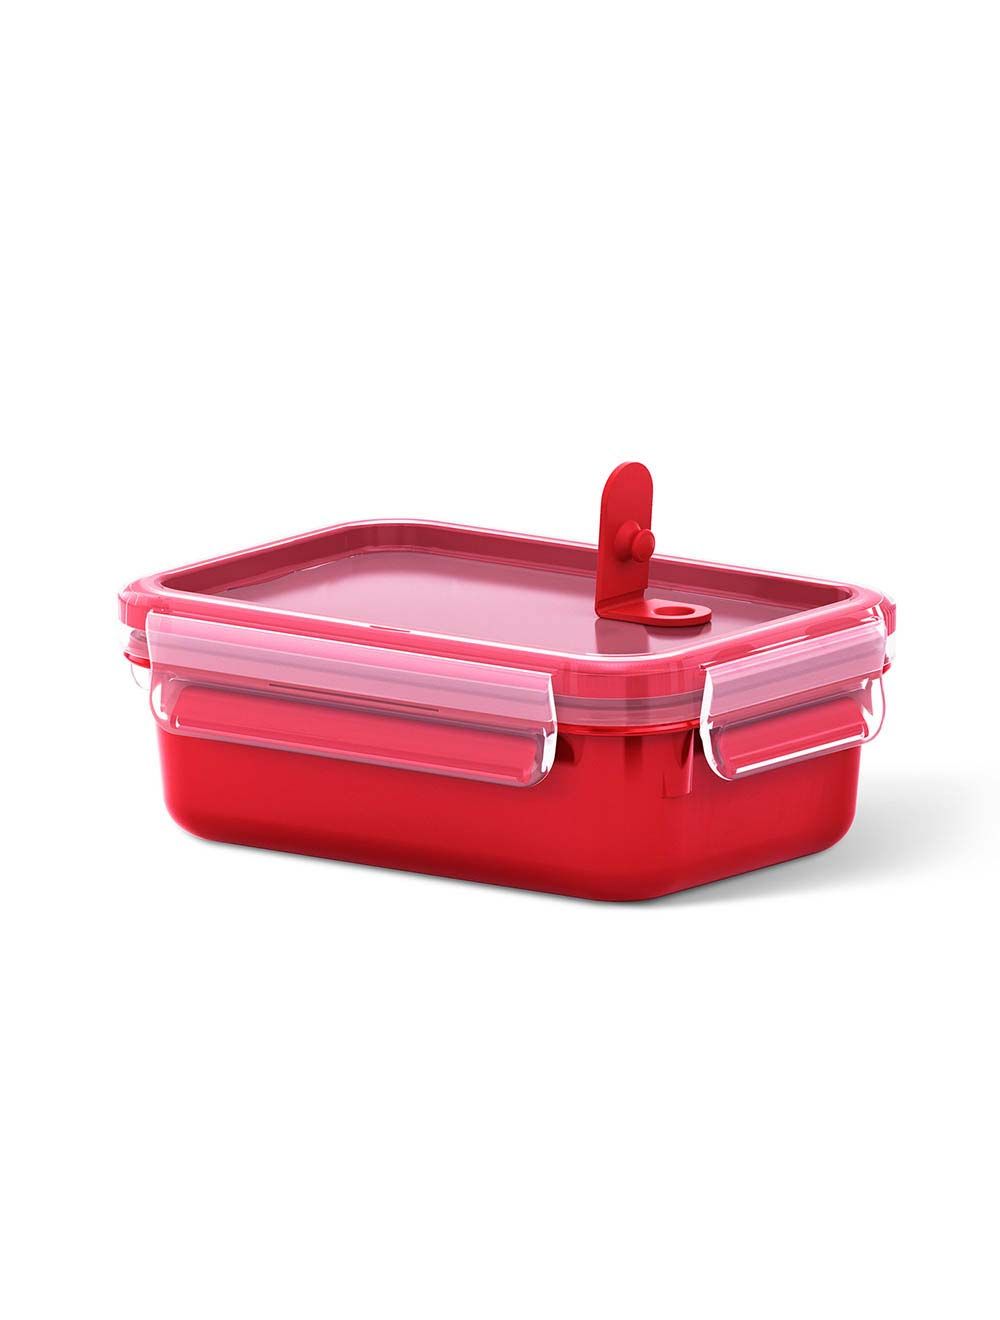 Tefal MasterSeal 1 L Food Container,K3102212